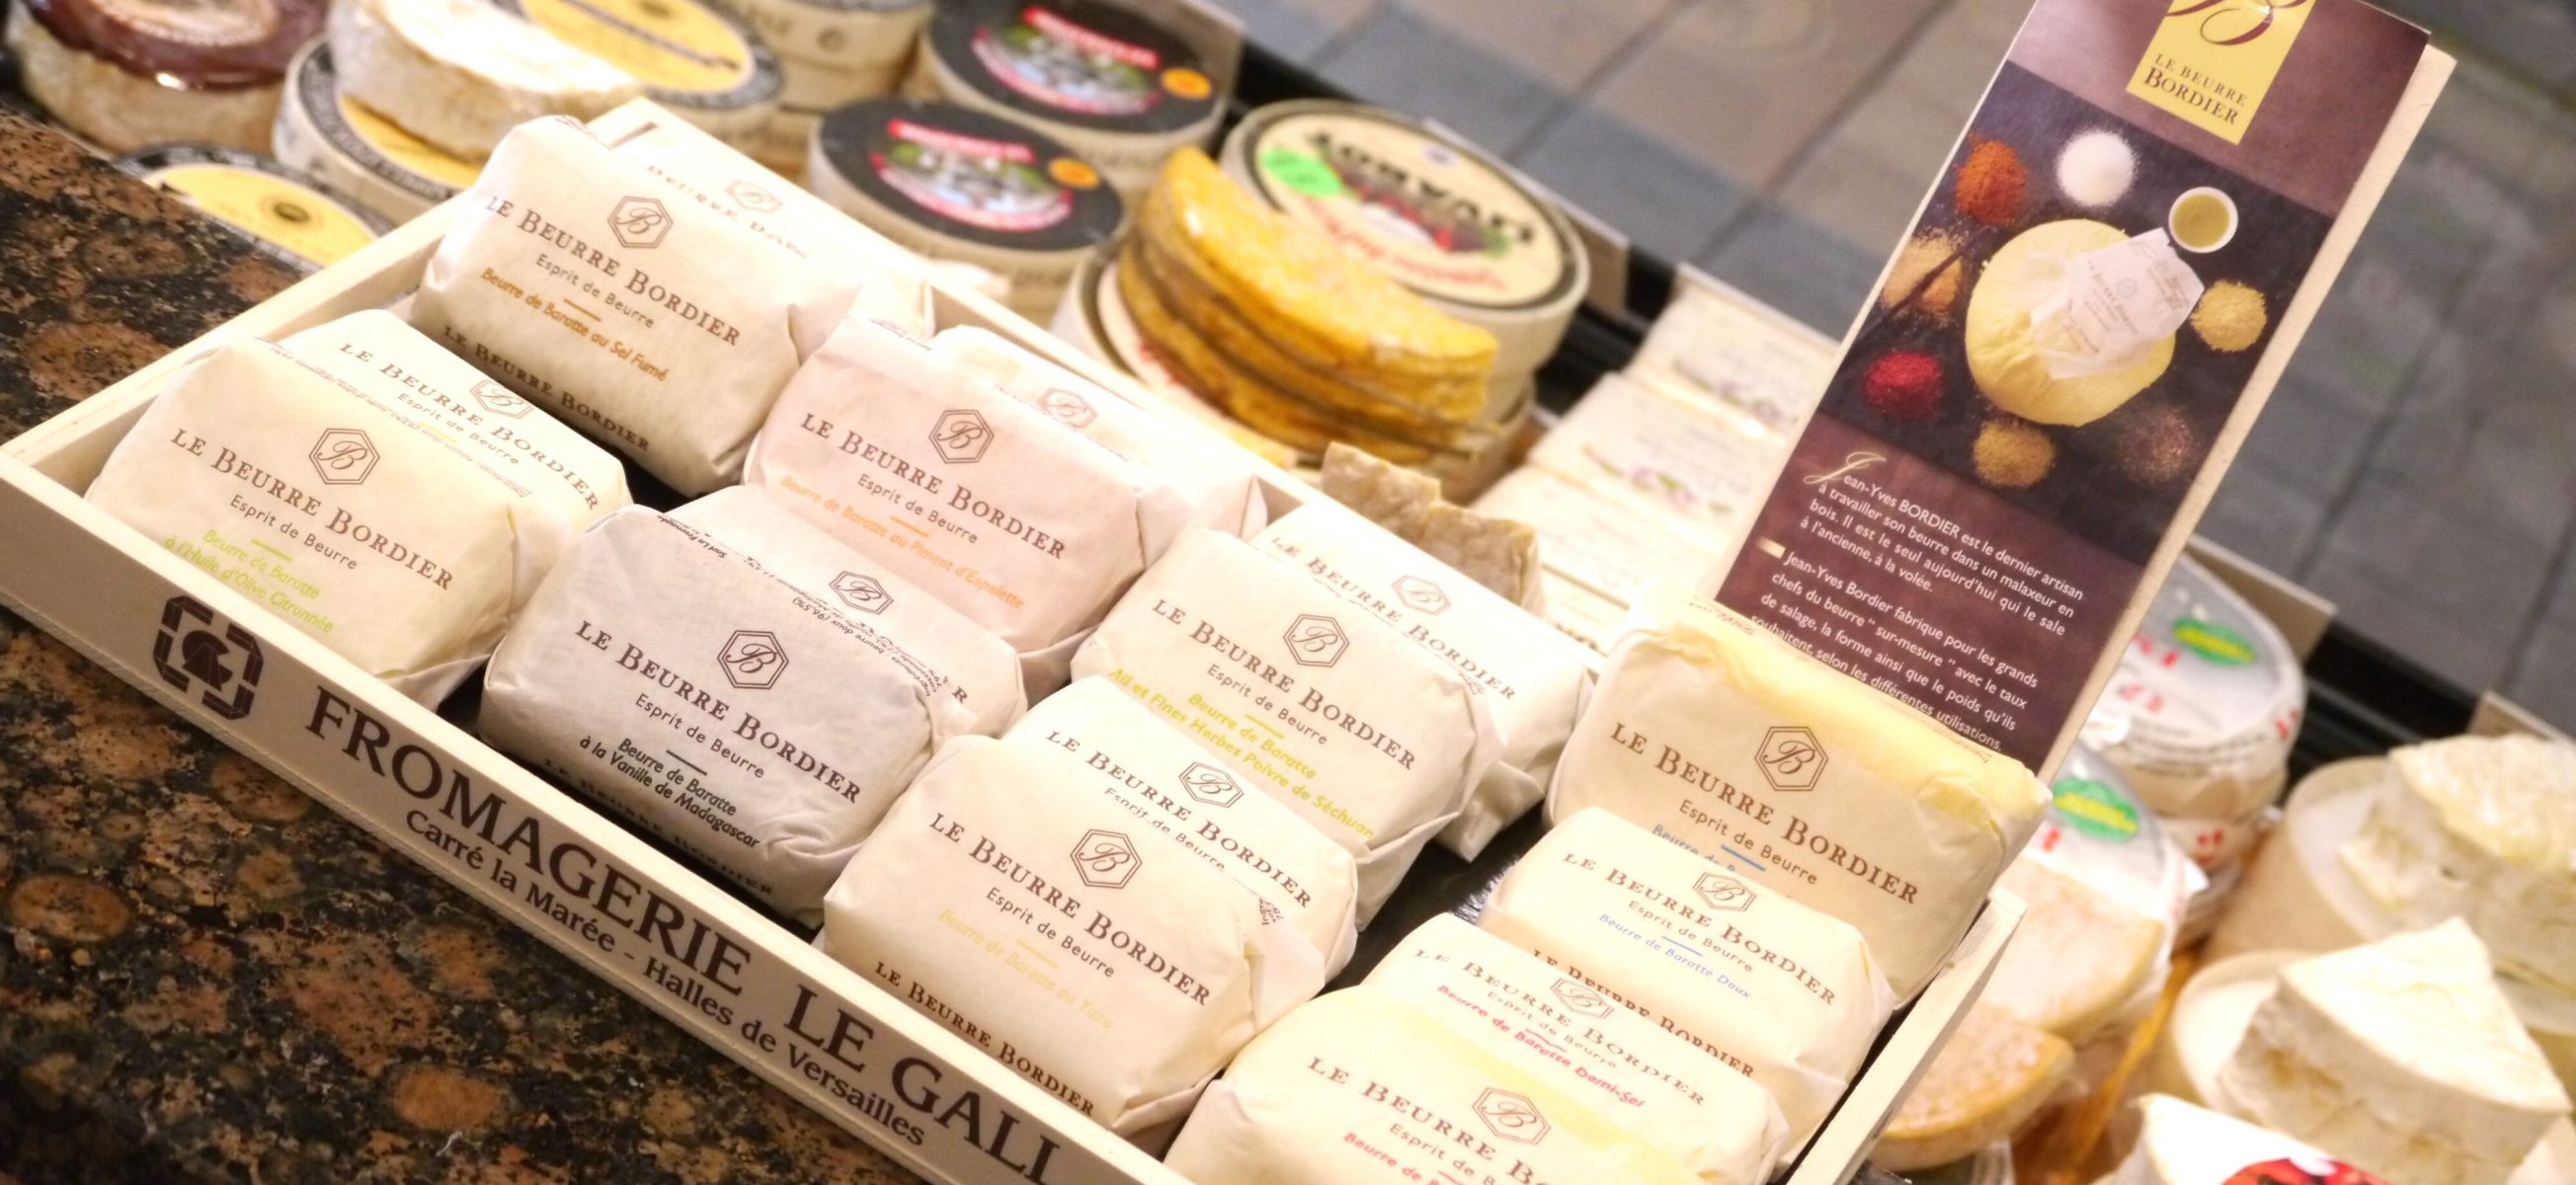 Fromagerie Le Gall